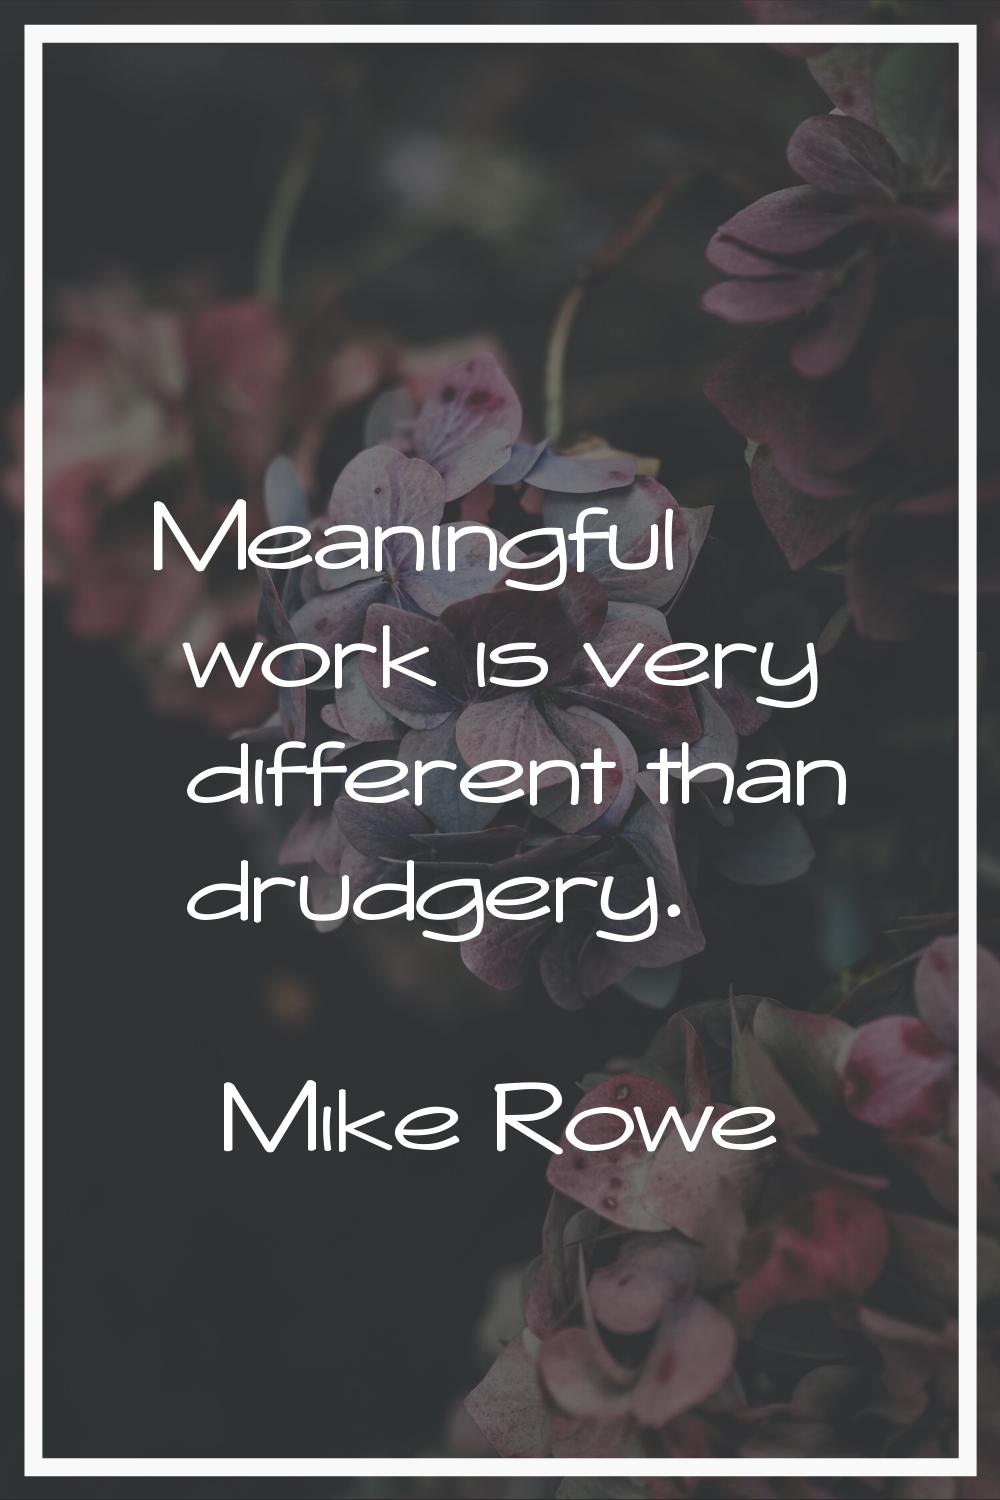 Meaningful work is very different than drudgery.